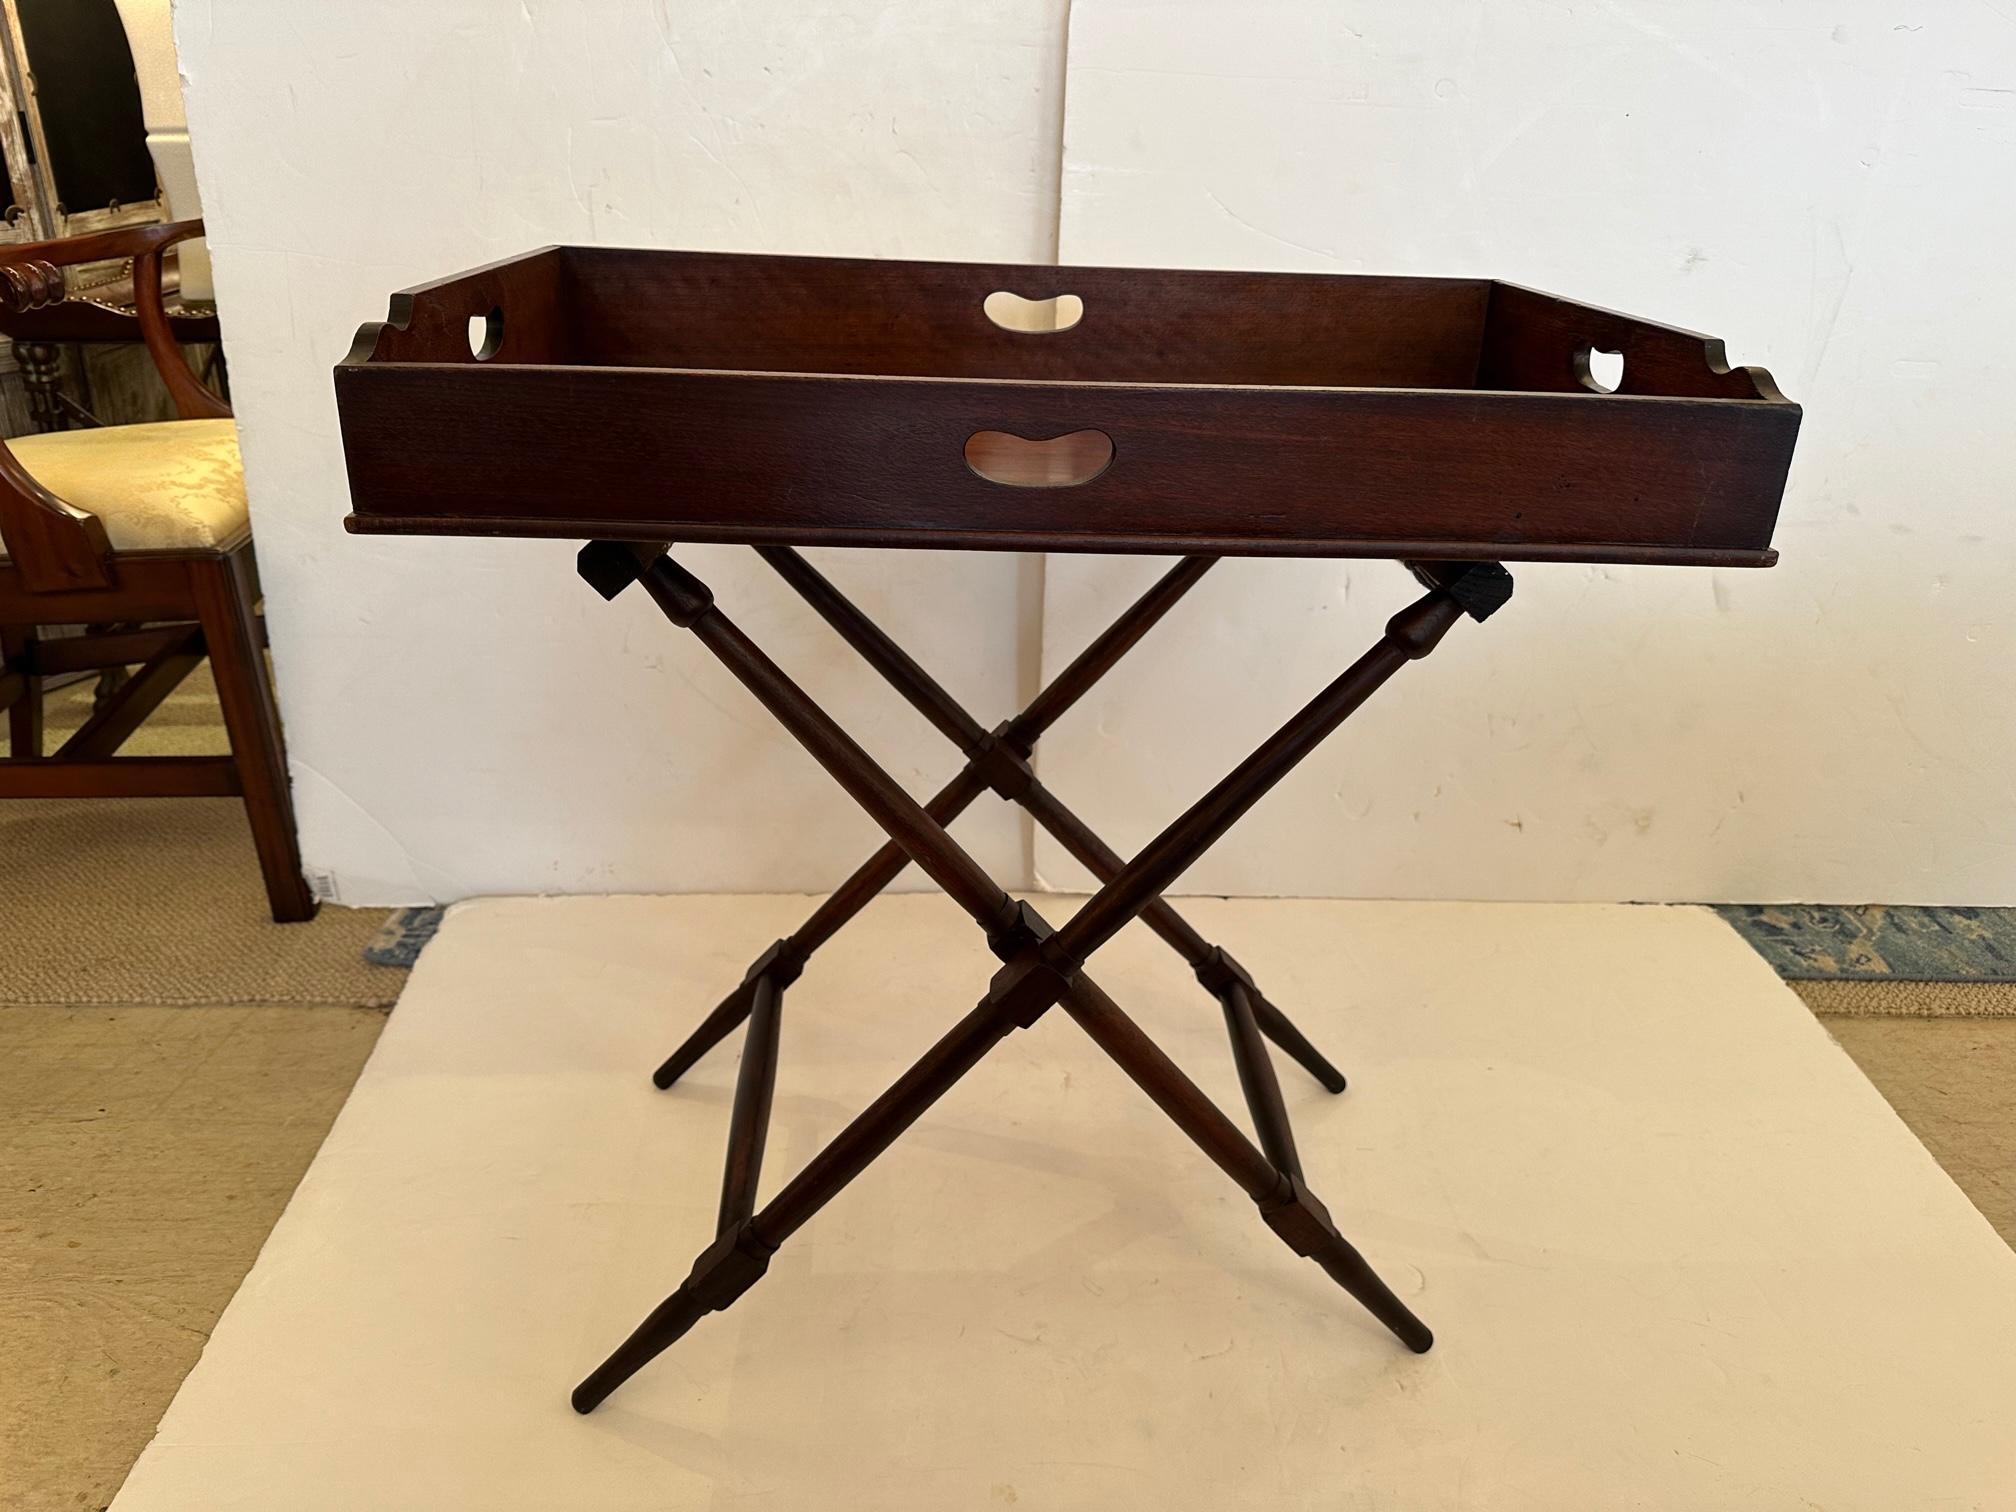 Handsome mahogany butlers tray on folding stand; stand has needlepointed straps with medallions as the cross supports.